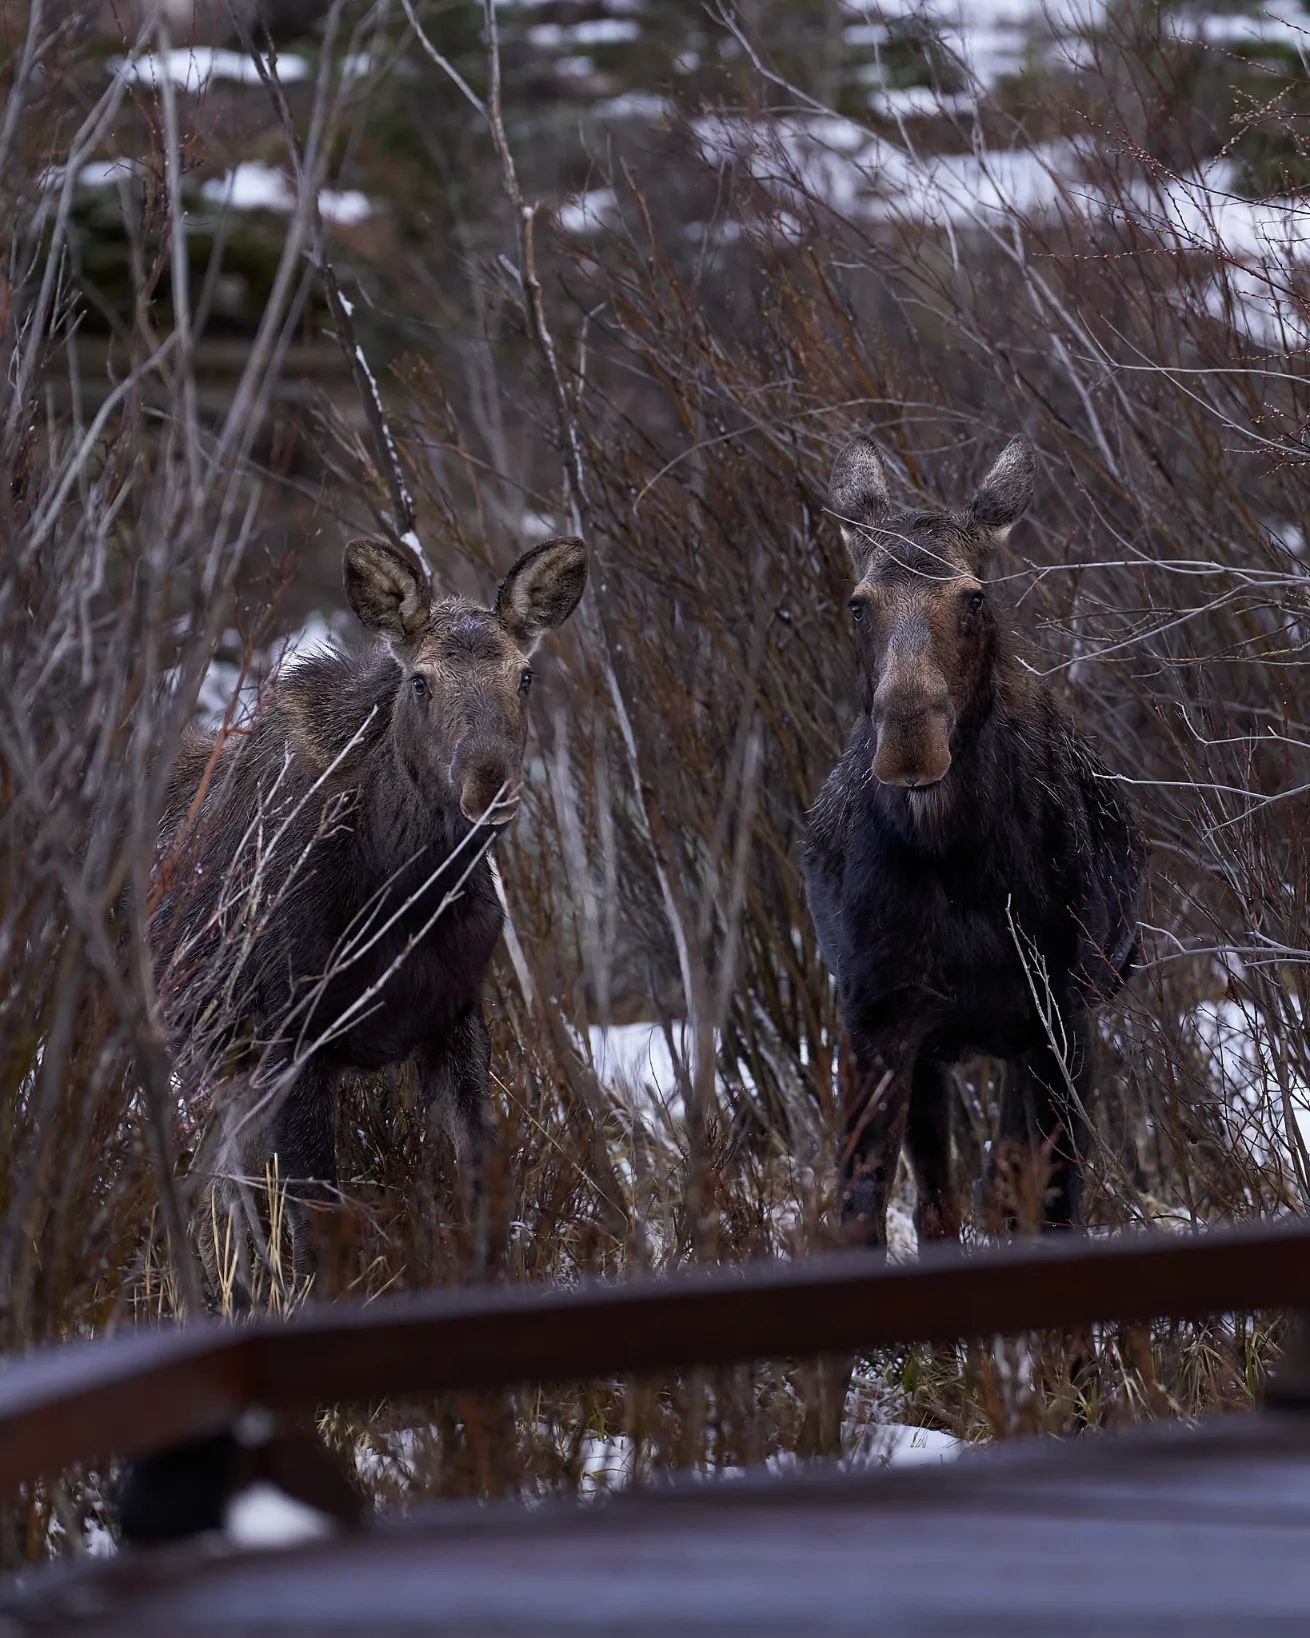 Happy MOOSE Monday!

Always be alert when you're out in nature walking on trails, these beauties could be standing on or next to the trail, casually having a afternoon snack. Don't want to spook them!

Always remember to keep your distance and leave 